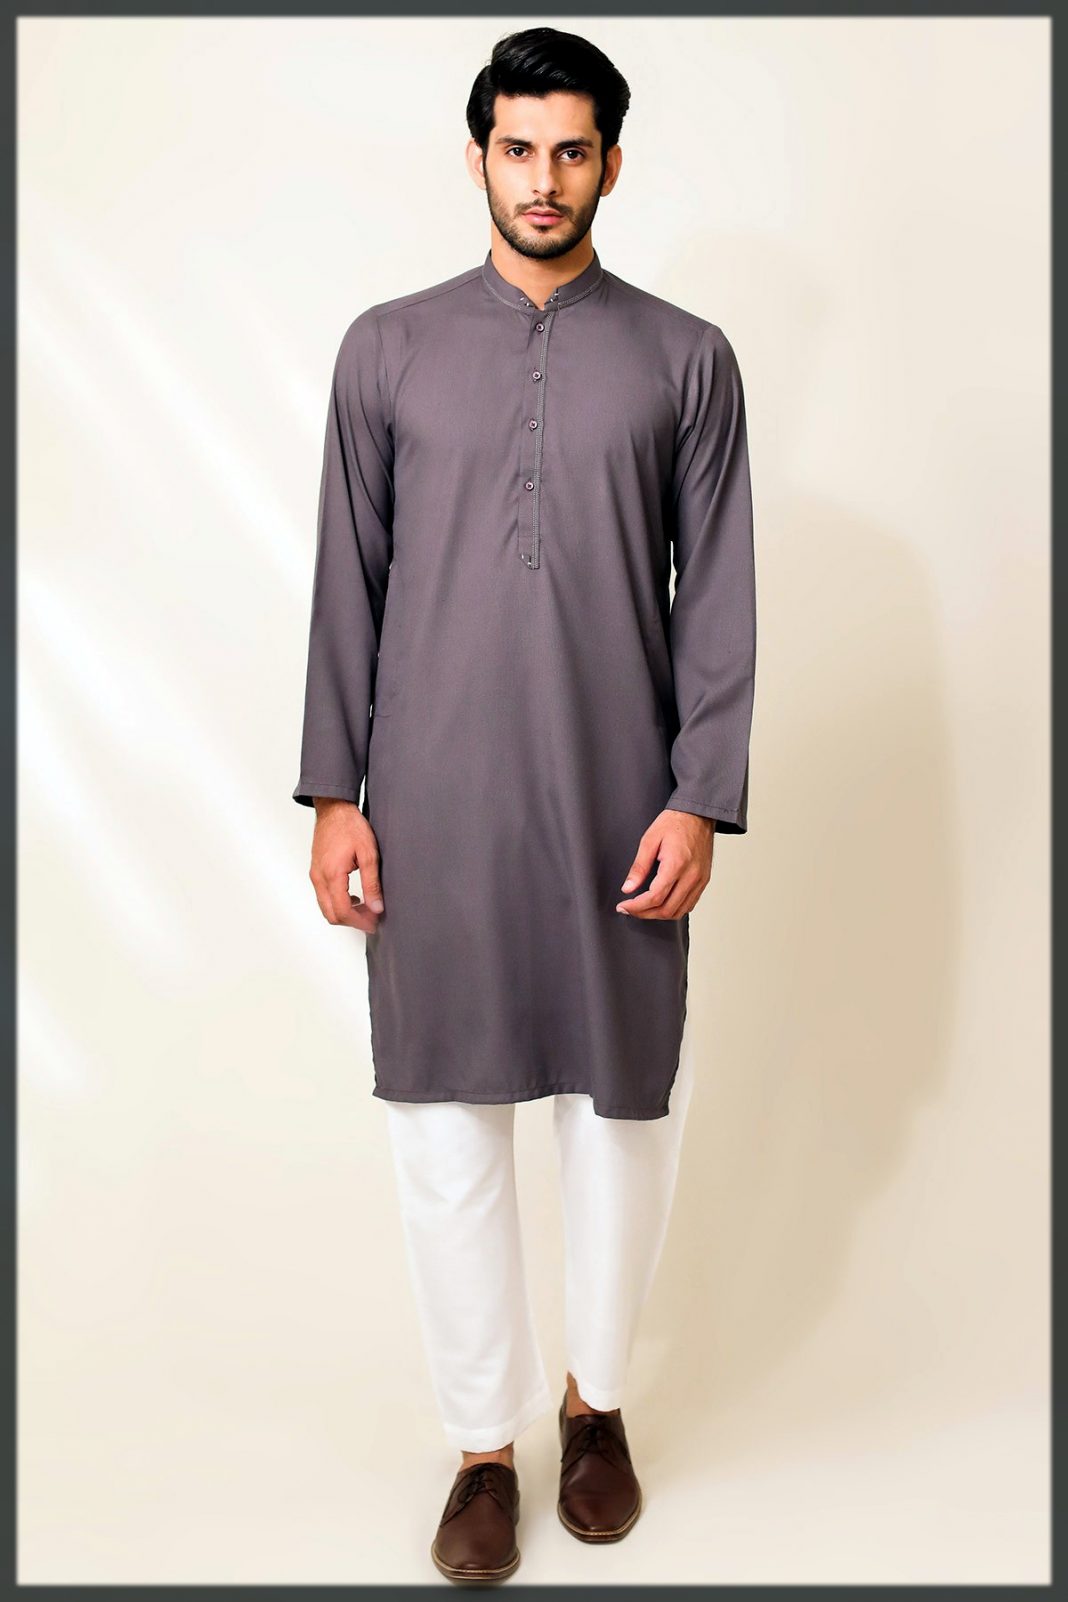 List Of Mens Clothing Brands In Lahore - Best Design Idea